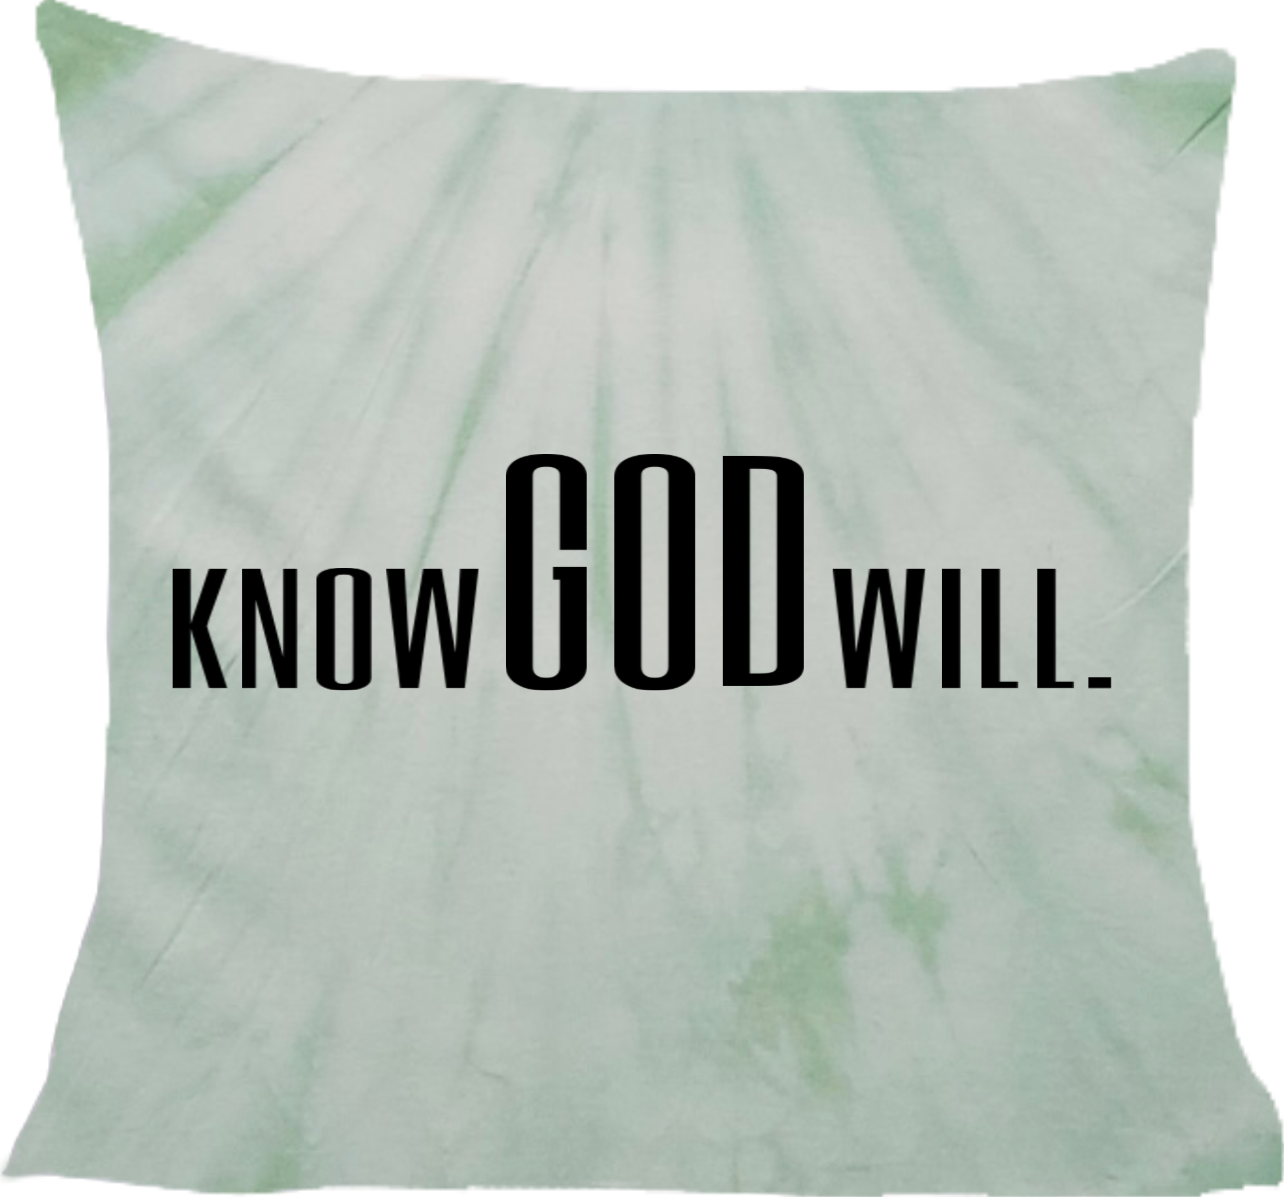 “Growth” Know GOD Will. Throw Pillow